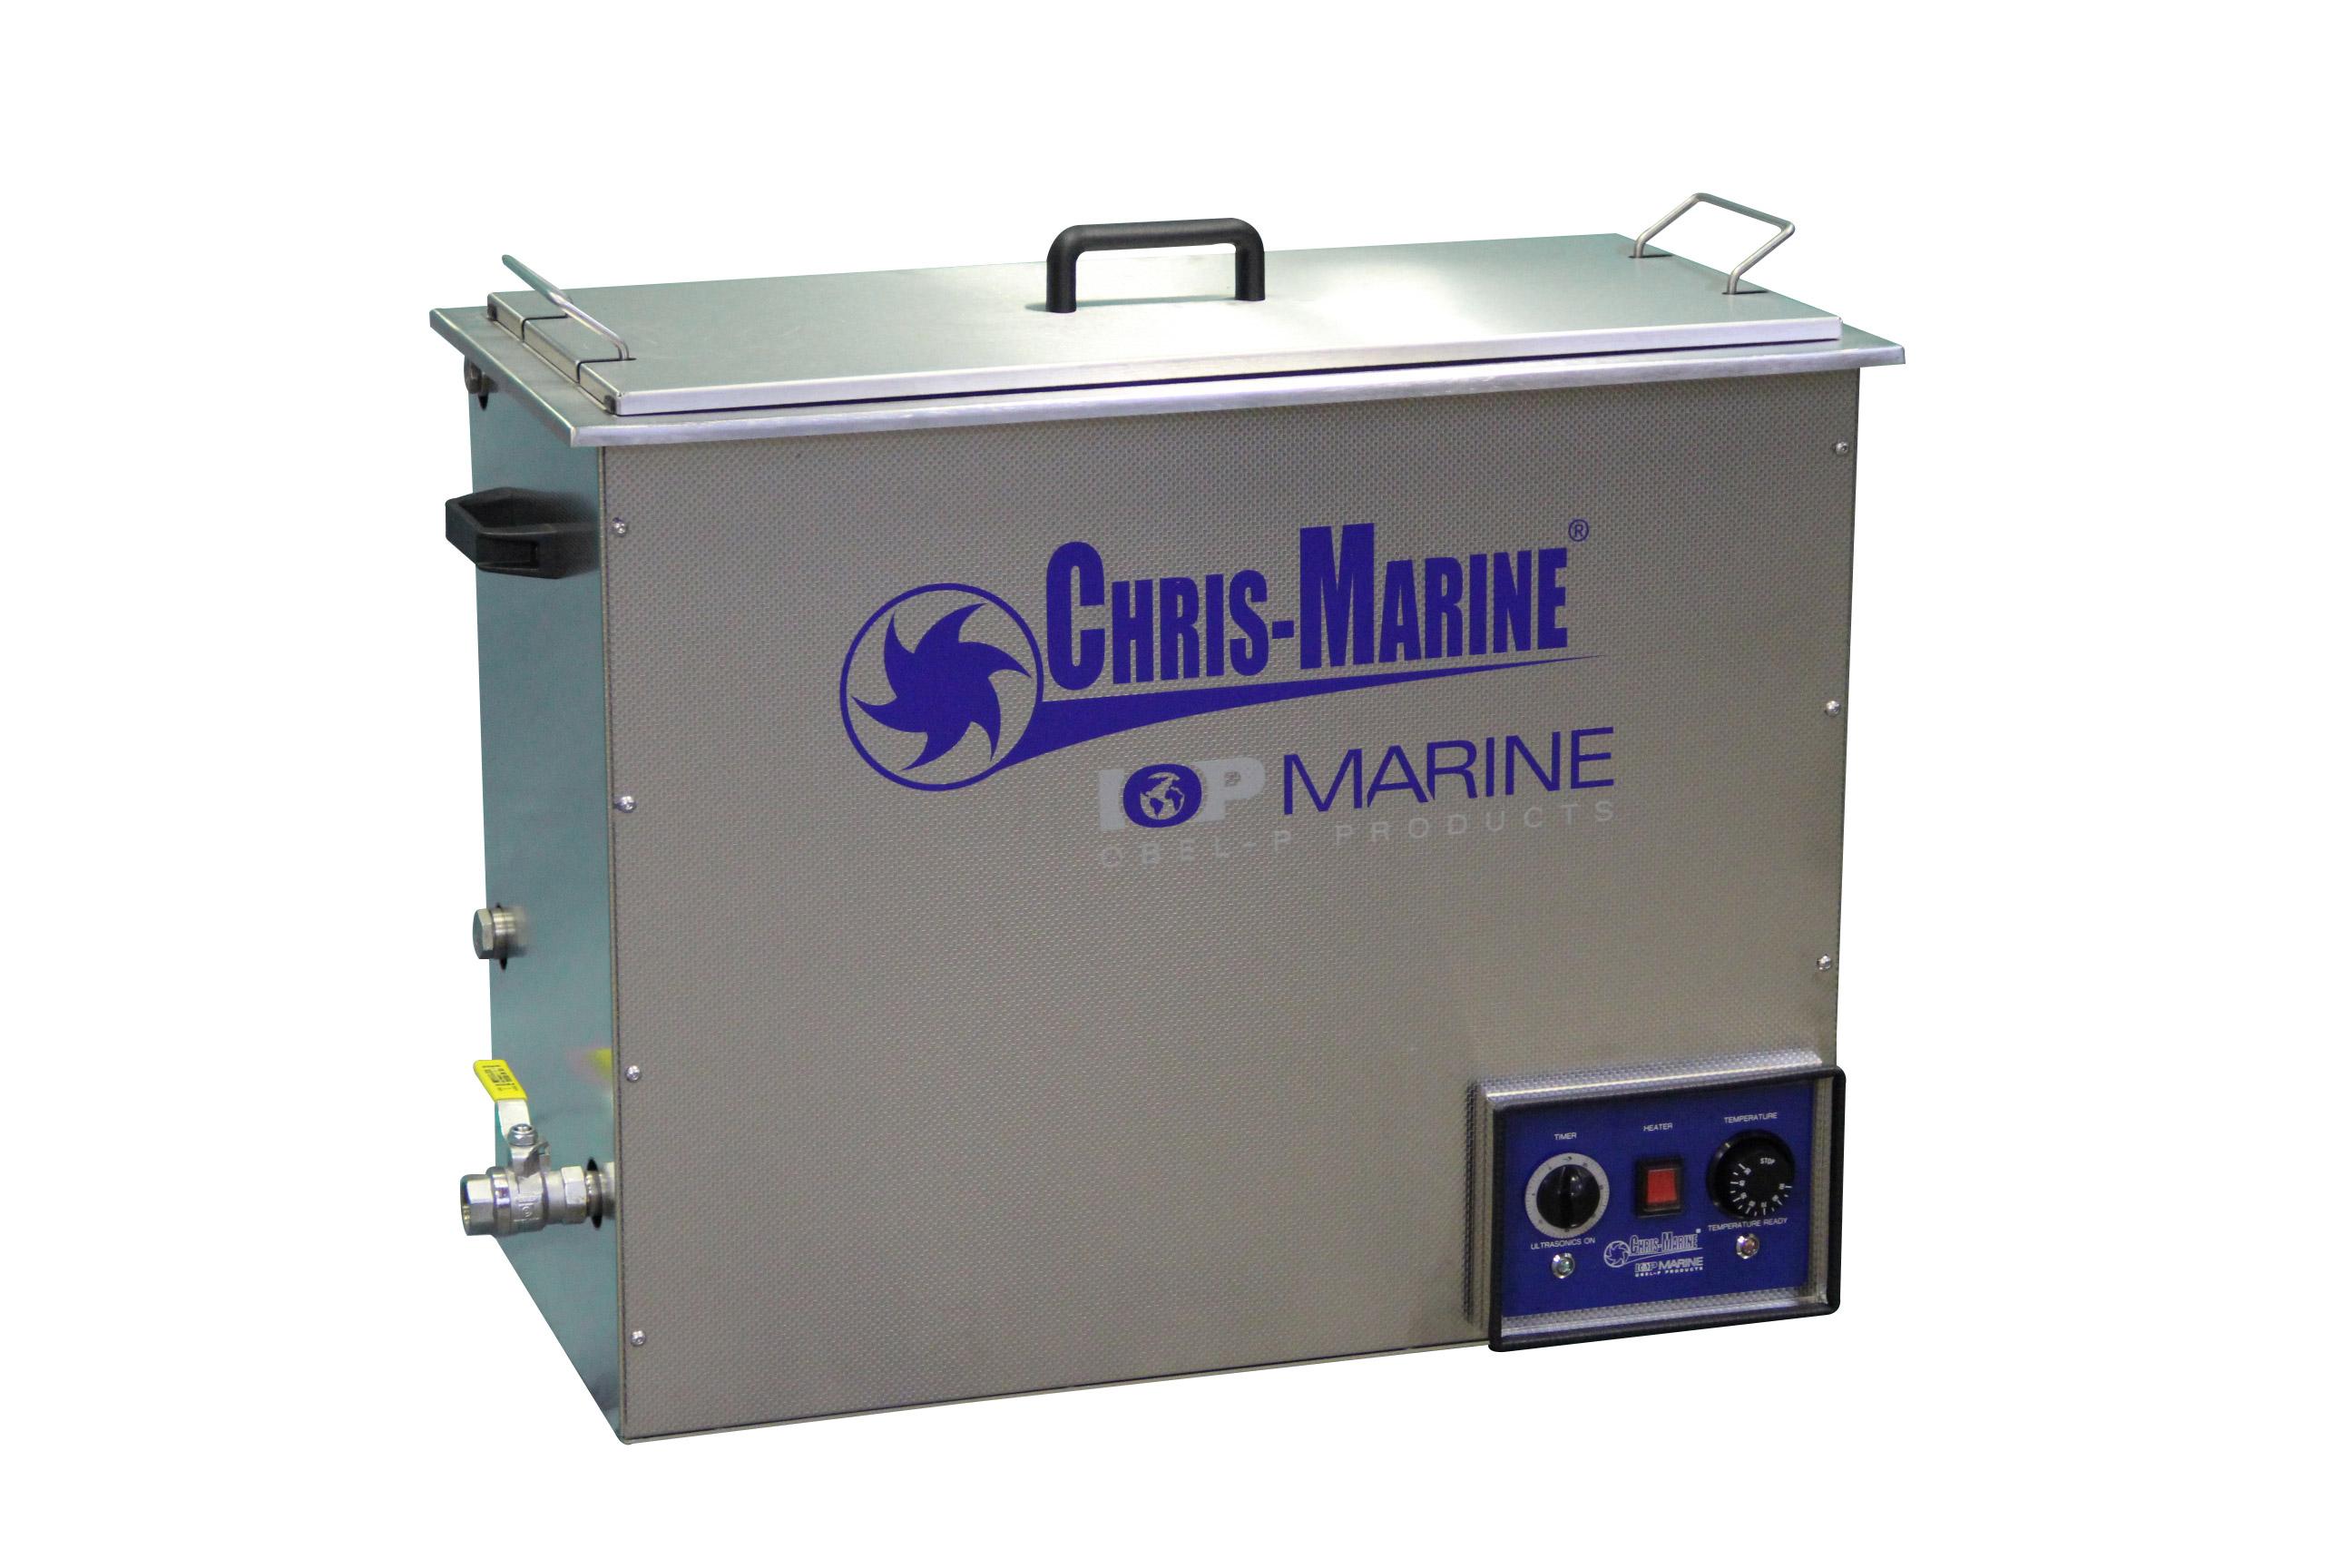 Product Ultrasonic Cleaning System / UCS SMALL - Chris-Marine image